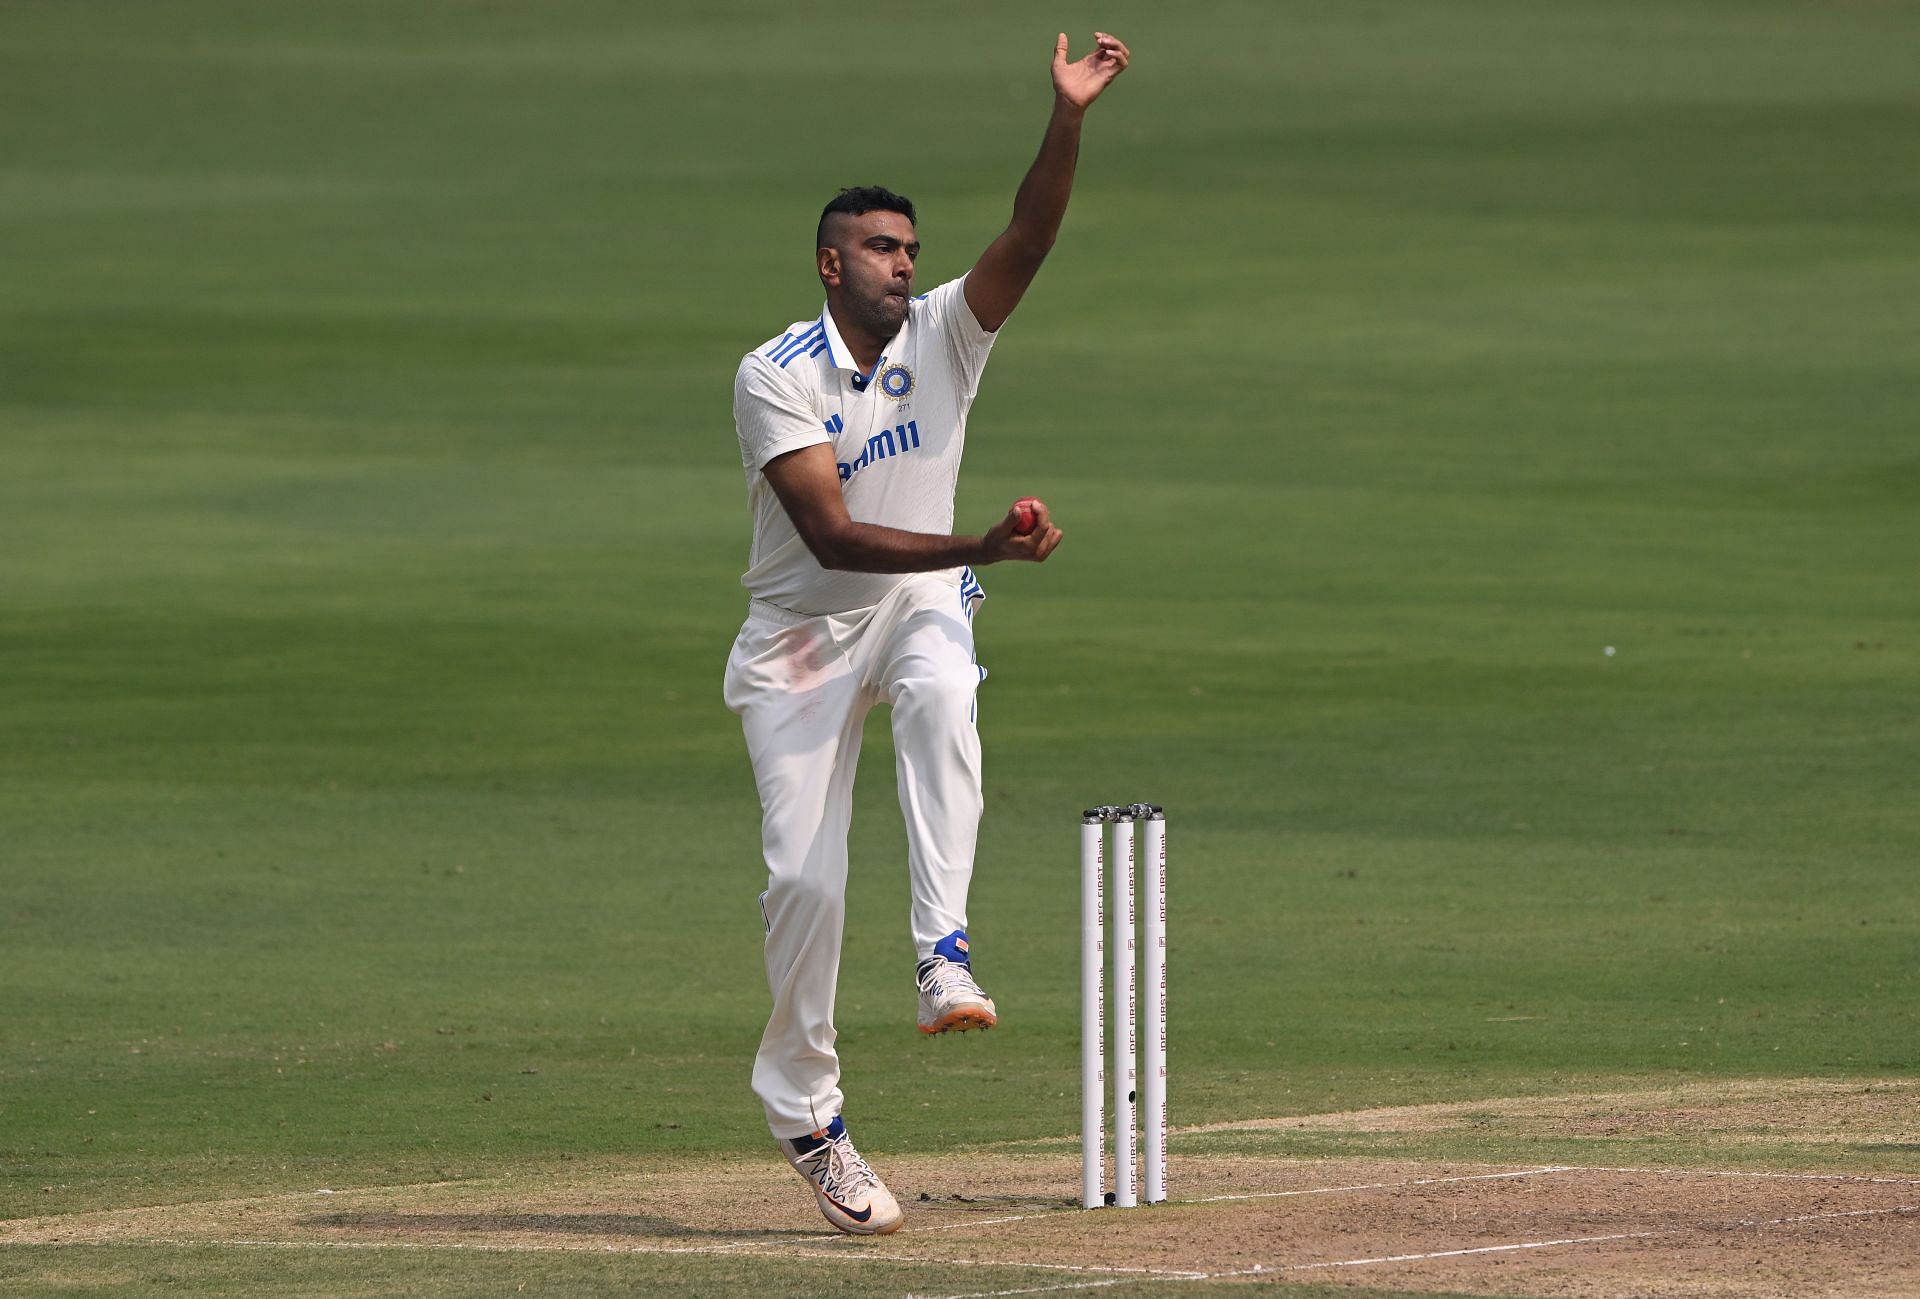 Ravichandran Ashwin registered figures of 3/126 in the second innings in Hyderabad. [P/C: BCCI]